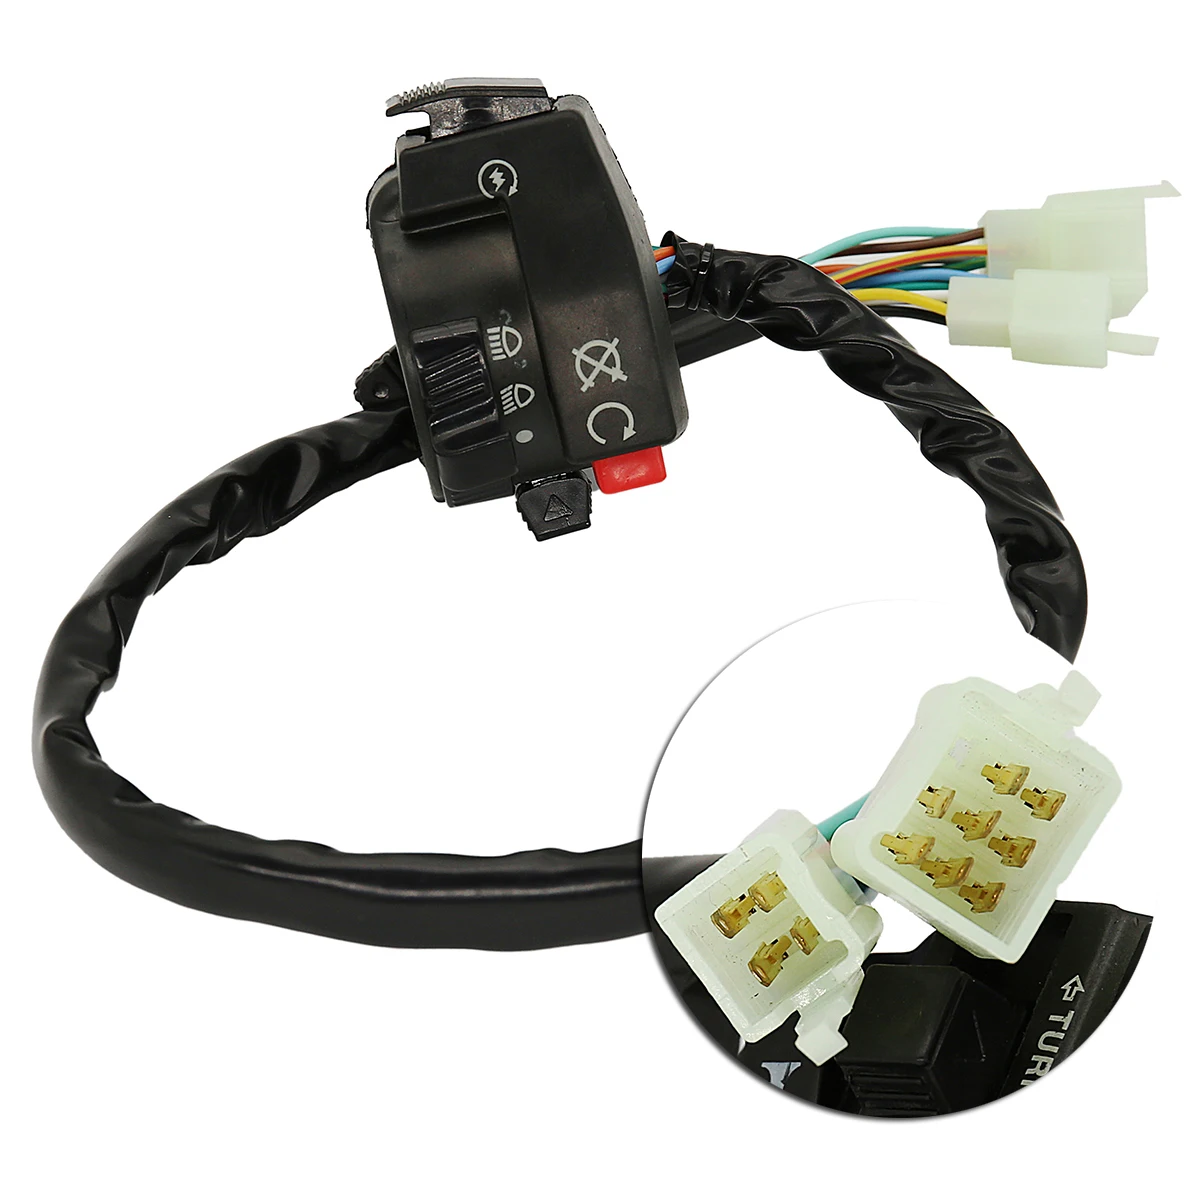 

12 Wire 5 Function Handle Control Switch Assembly With Choke Lever For Chinese ATV Quad 110cc 125cc 150cc 200cc 250cc